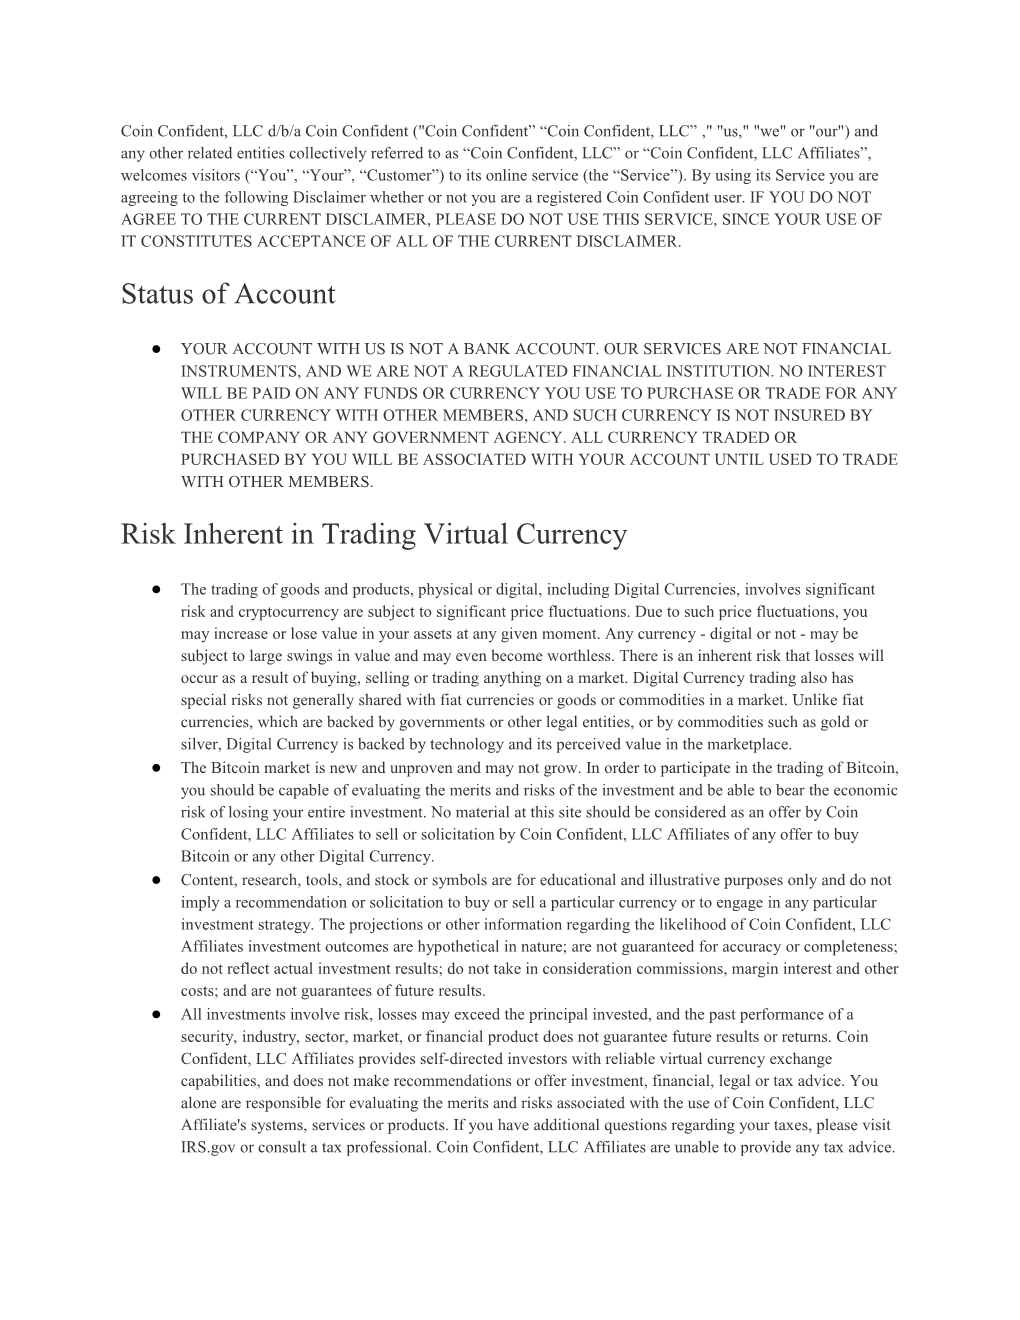 Risk Inherent in Trading Virtual Currency